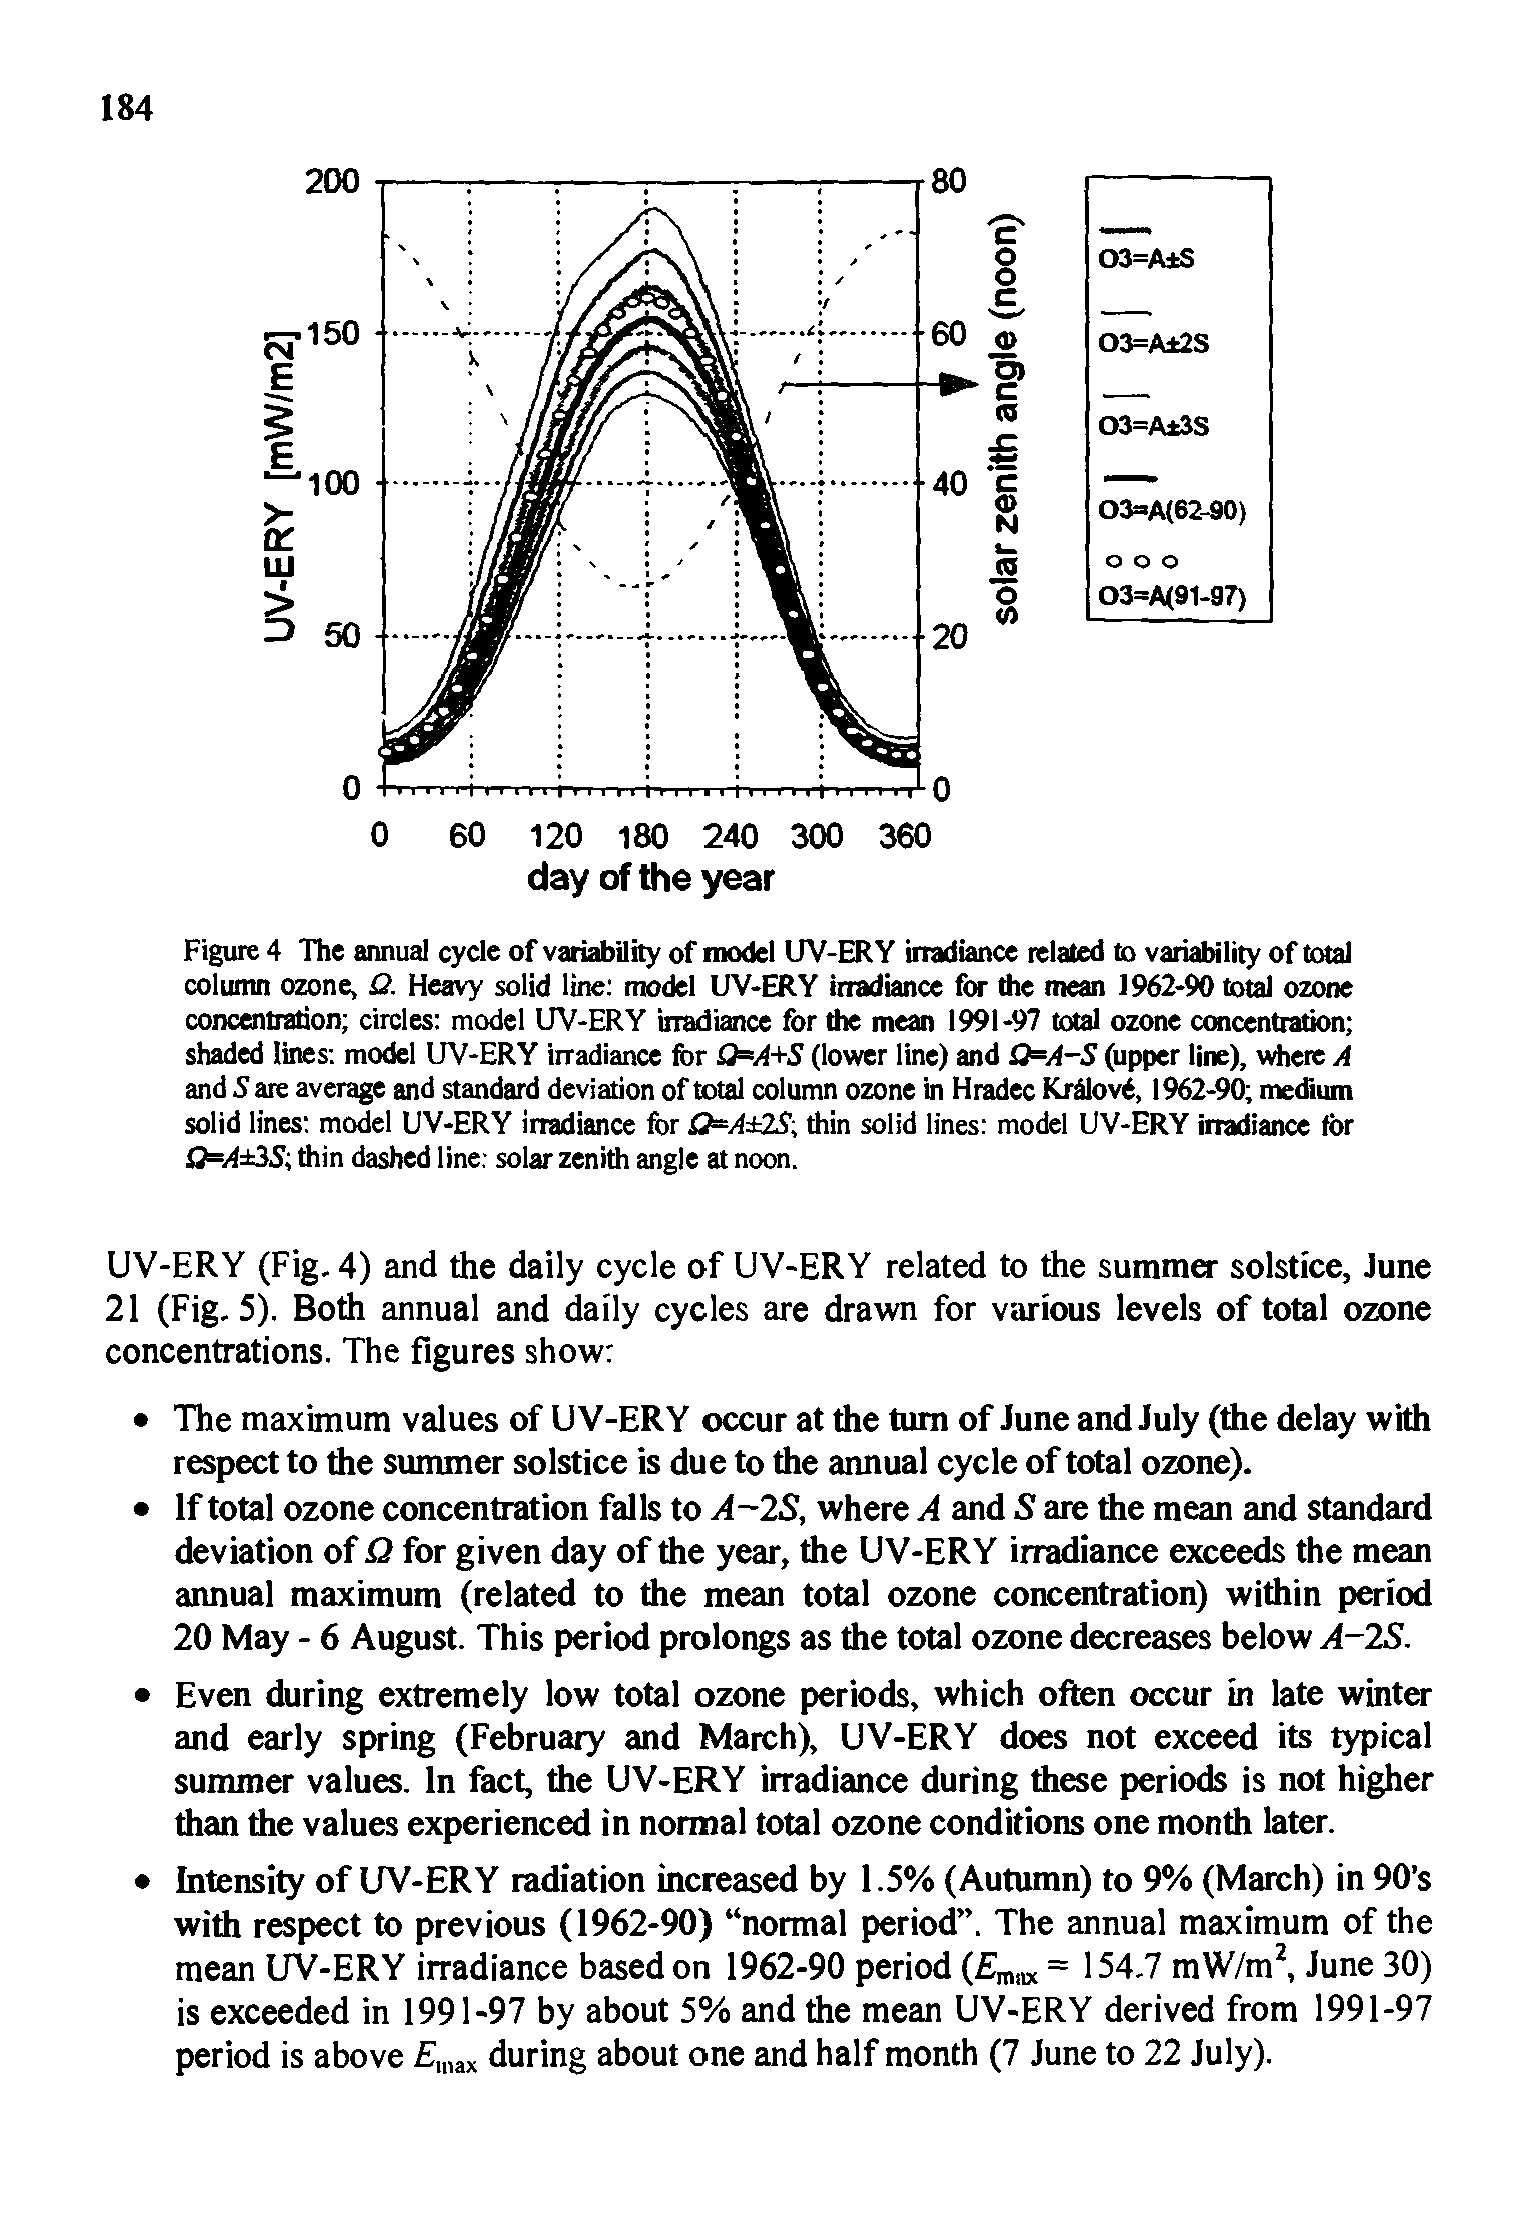 Figure 4 The annual cycle of variability of model UV-ERY irradiance related to variability of total column ozone, Q. Heavy solid line model UV-ERY irradiance for the mean 1962-90 total ozone concentration circles model UV-ERY irradiance for the mean 1991-97 total ozone concentration shaded lines model UV-ERY irTadiance for Q=A+S (lower line) and Q=A-S (upper line), where A and Sare average and standard deviation of total column ozone in Hradec Krdlovi, 1962-90 medium solid lines model UV-ERY irradiance for Q AOS., thin solid lines model UV-ERY irradiance for 0= 35 thin dashed line solar zenith angle at noon.